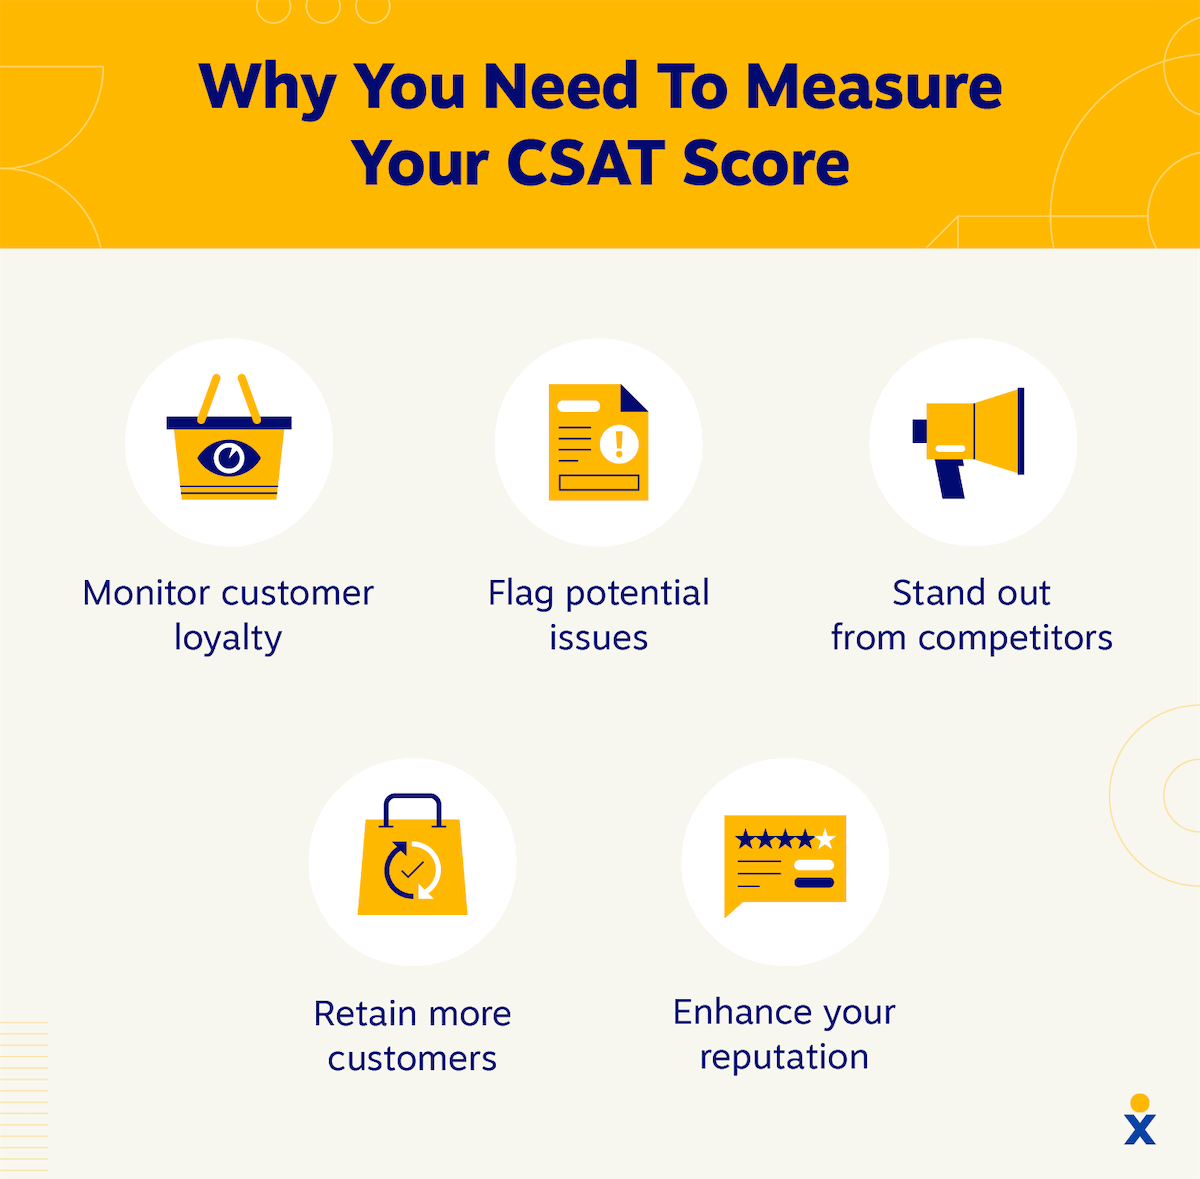 List of reasons why businesses need to measure CSAT scores, including to help monitor customer loyalty, flag issues, and retain customers.